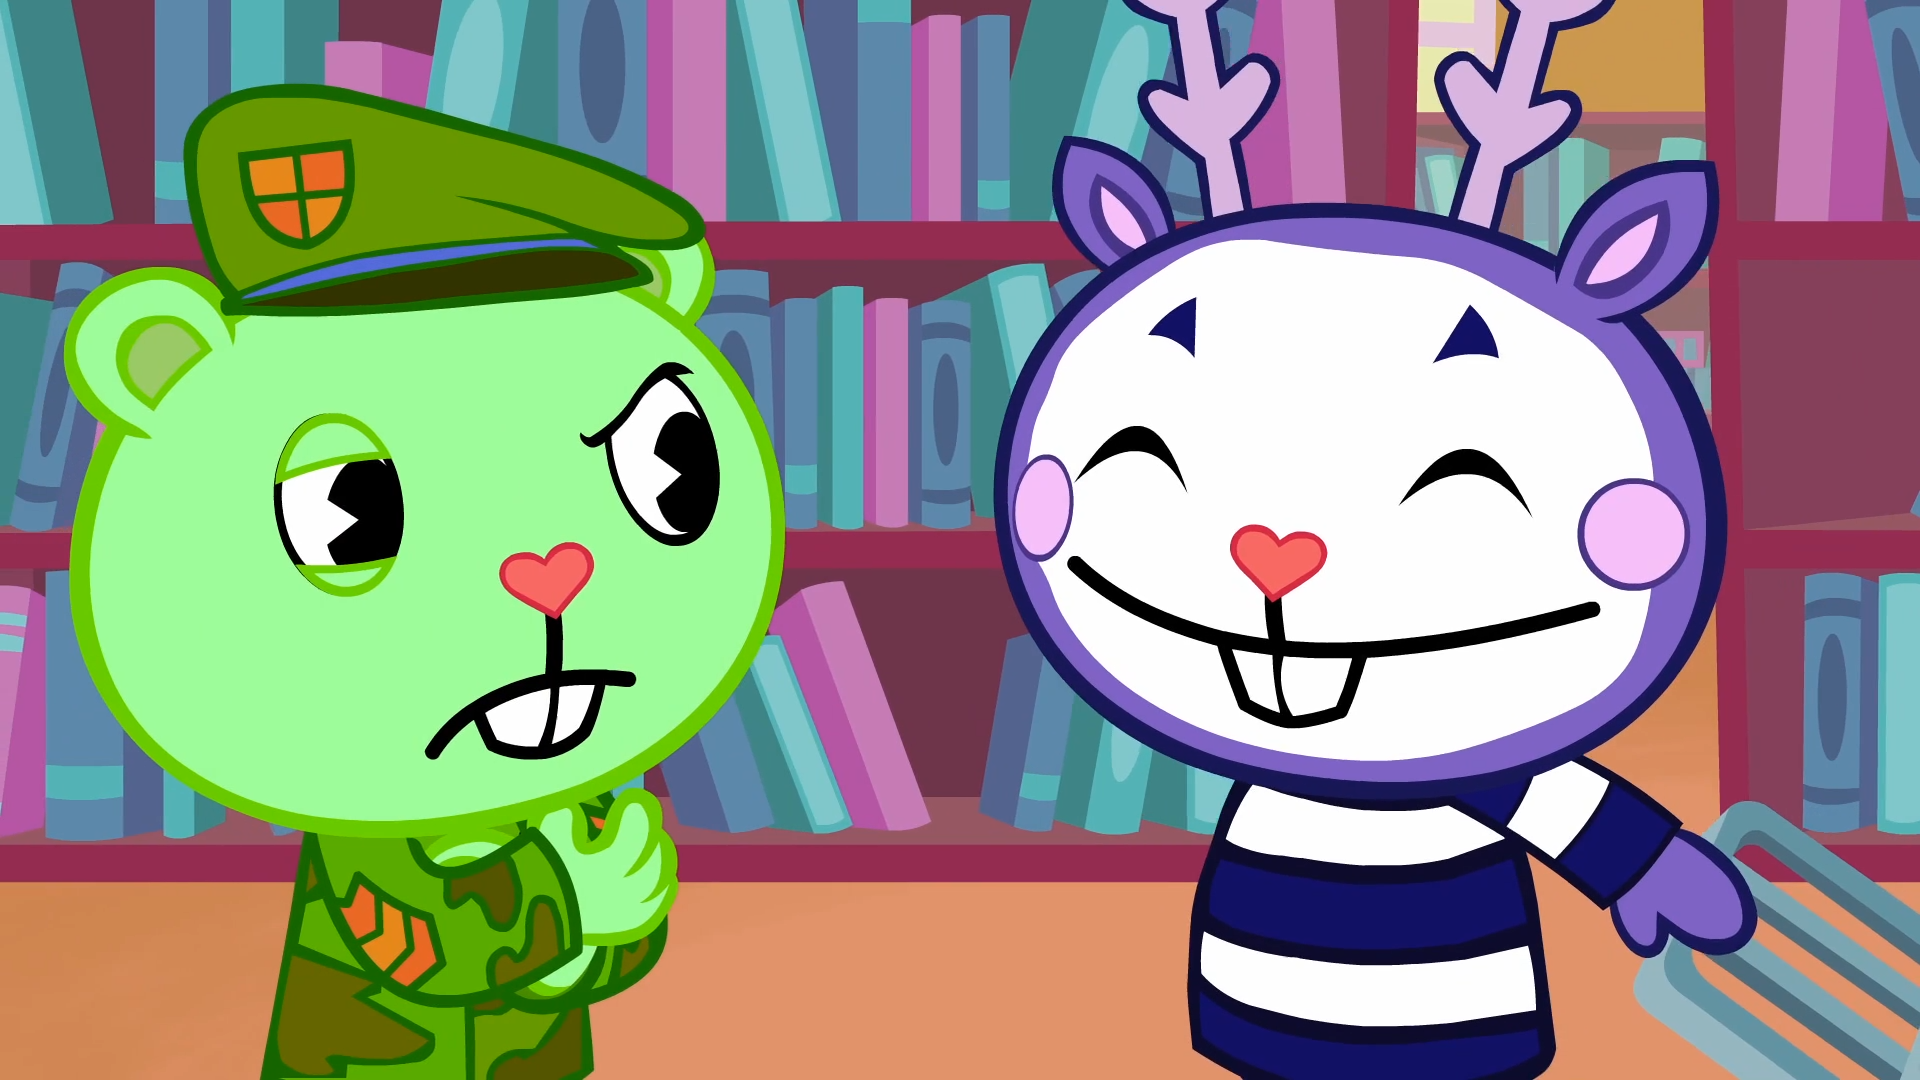 Happy Tree friends MIME and Flippy